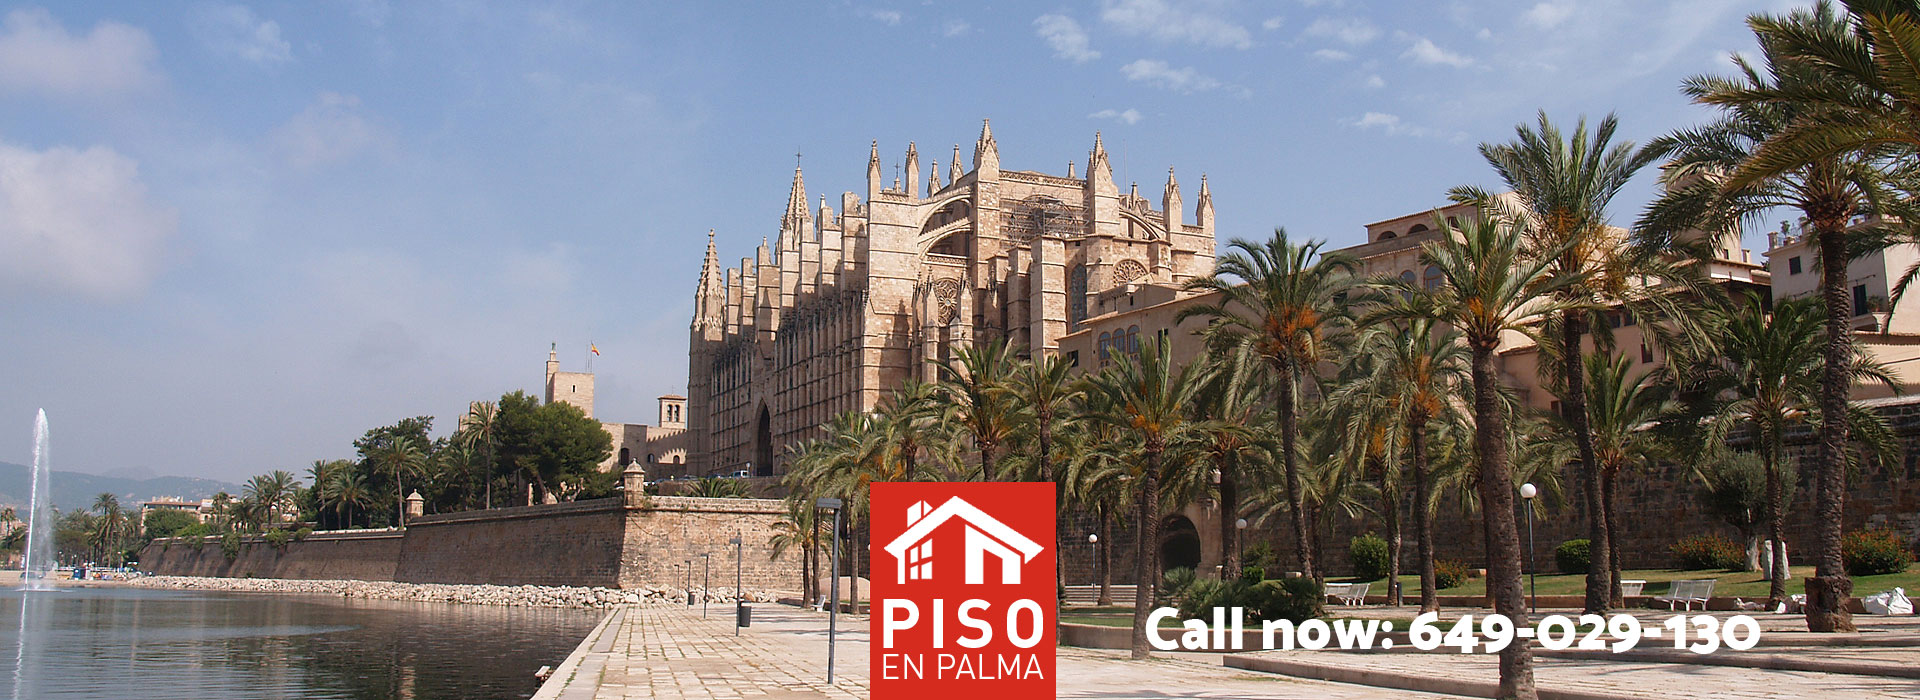 Flats for sale or to rent in Palma